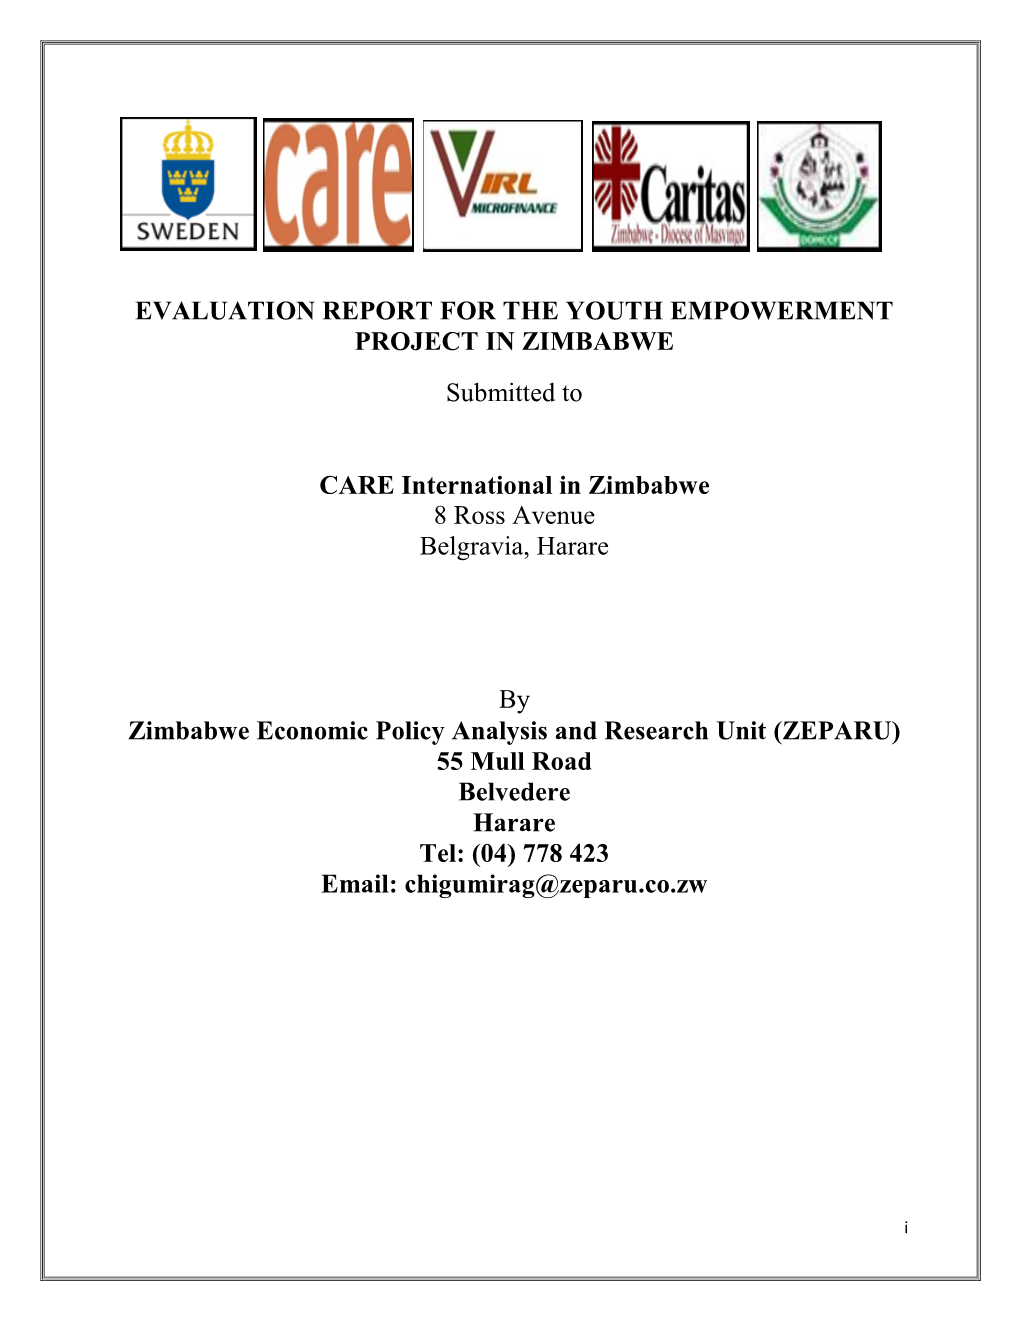 Evaluation Report for the Youth Empowerment Project in Zimbabwe